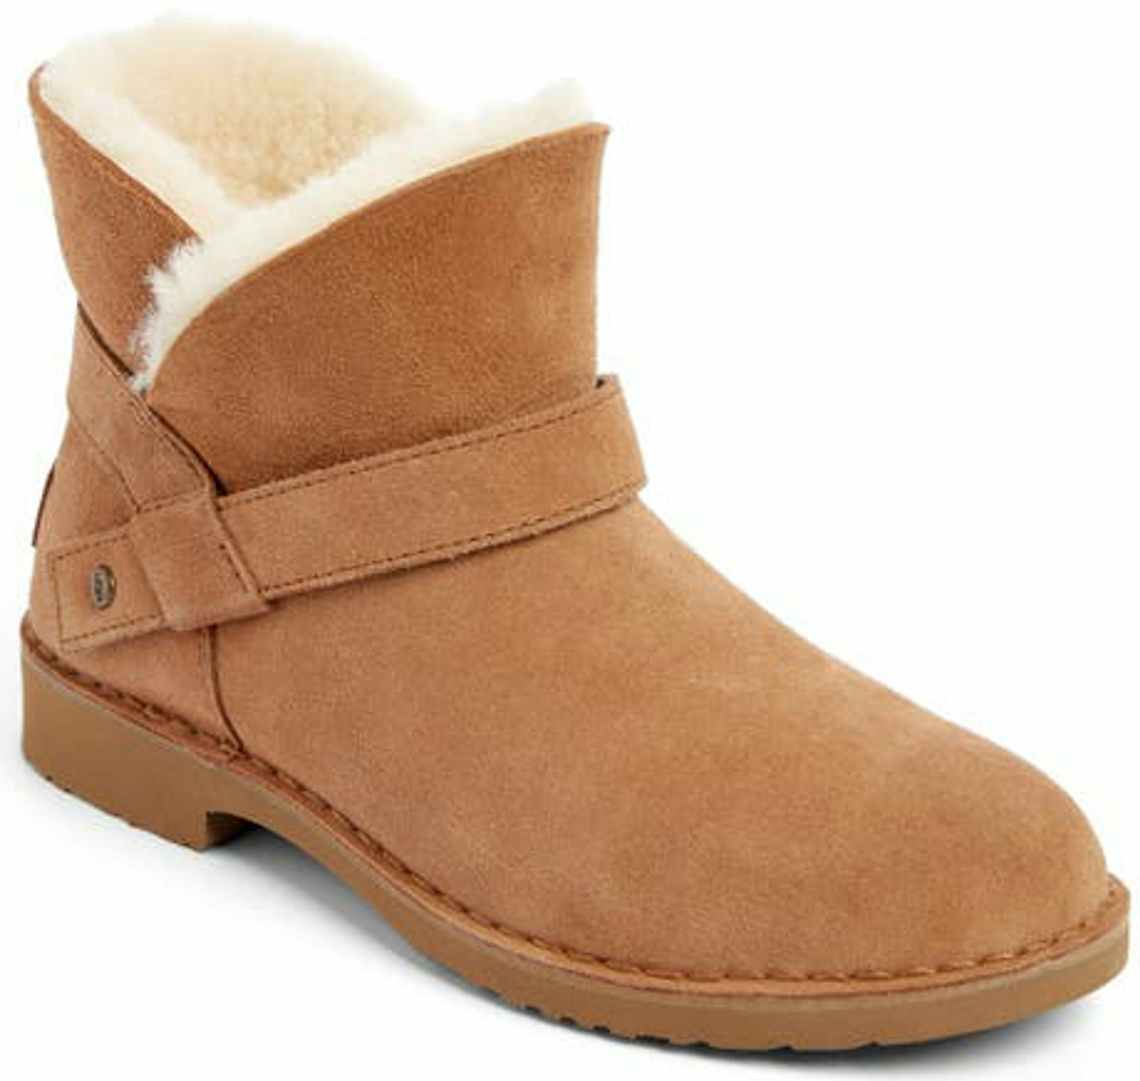 nordstrom-ugg-womens-boots-100421